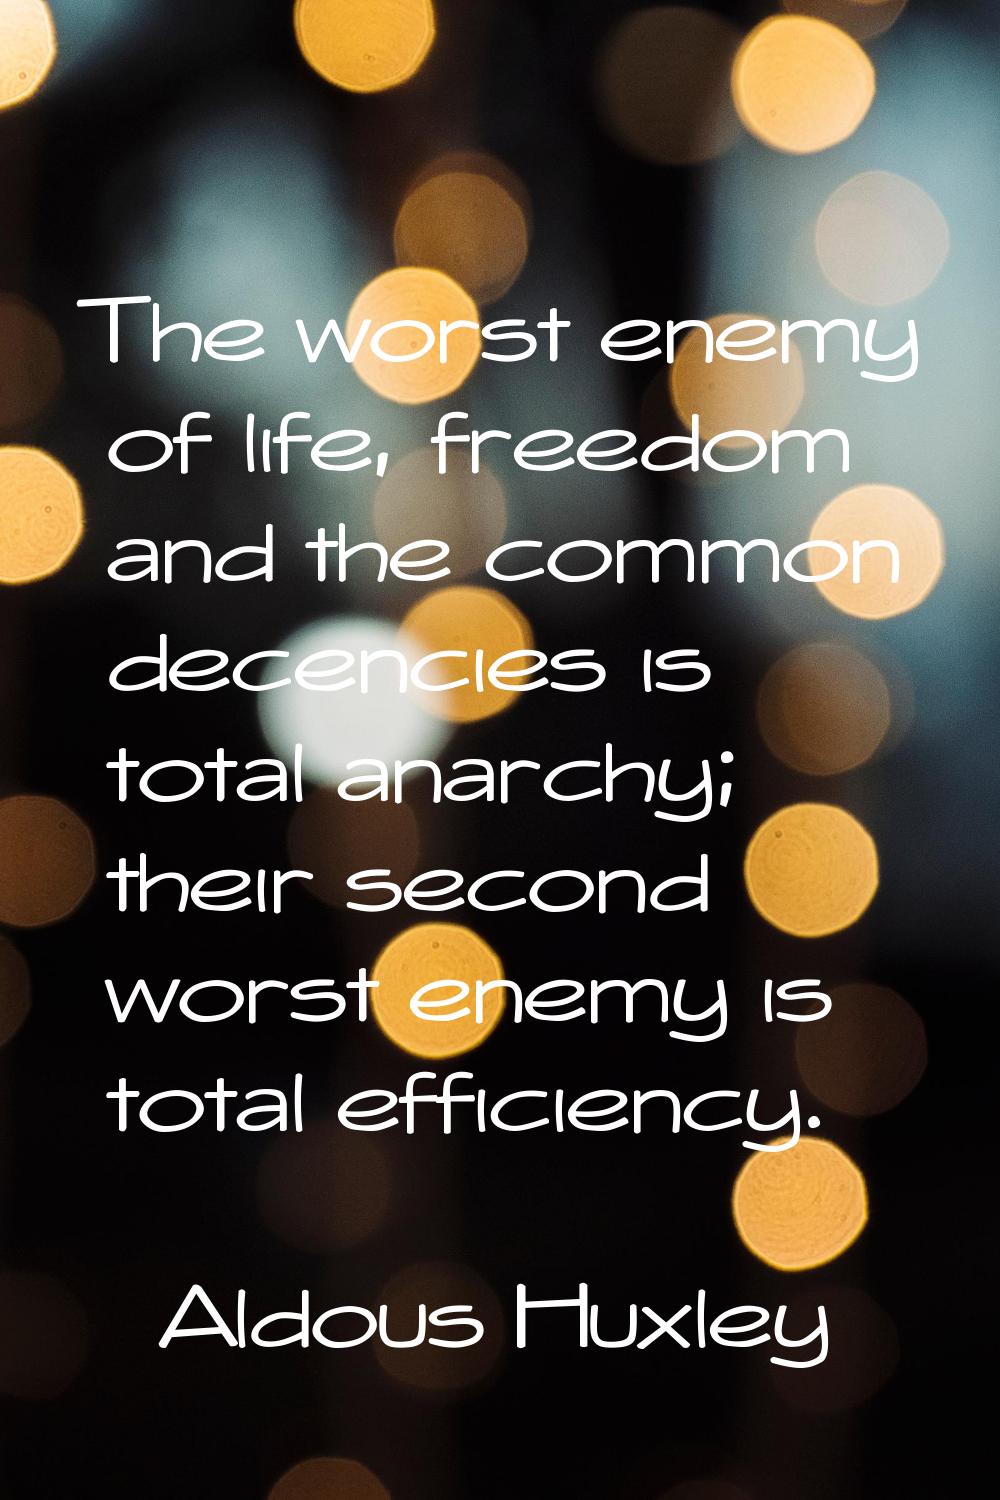 The worst enemy of life, freedom and the common decencies is total anarchy; their second worst enem